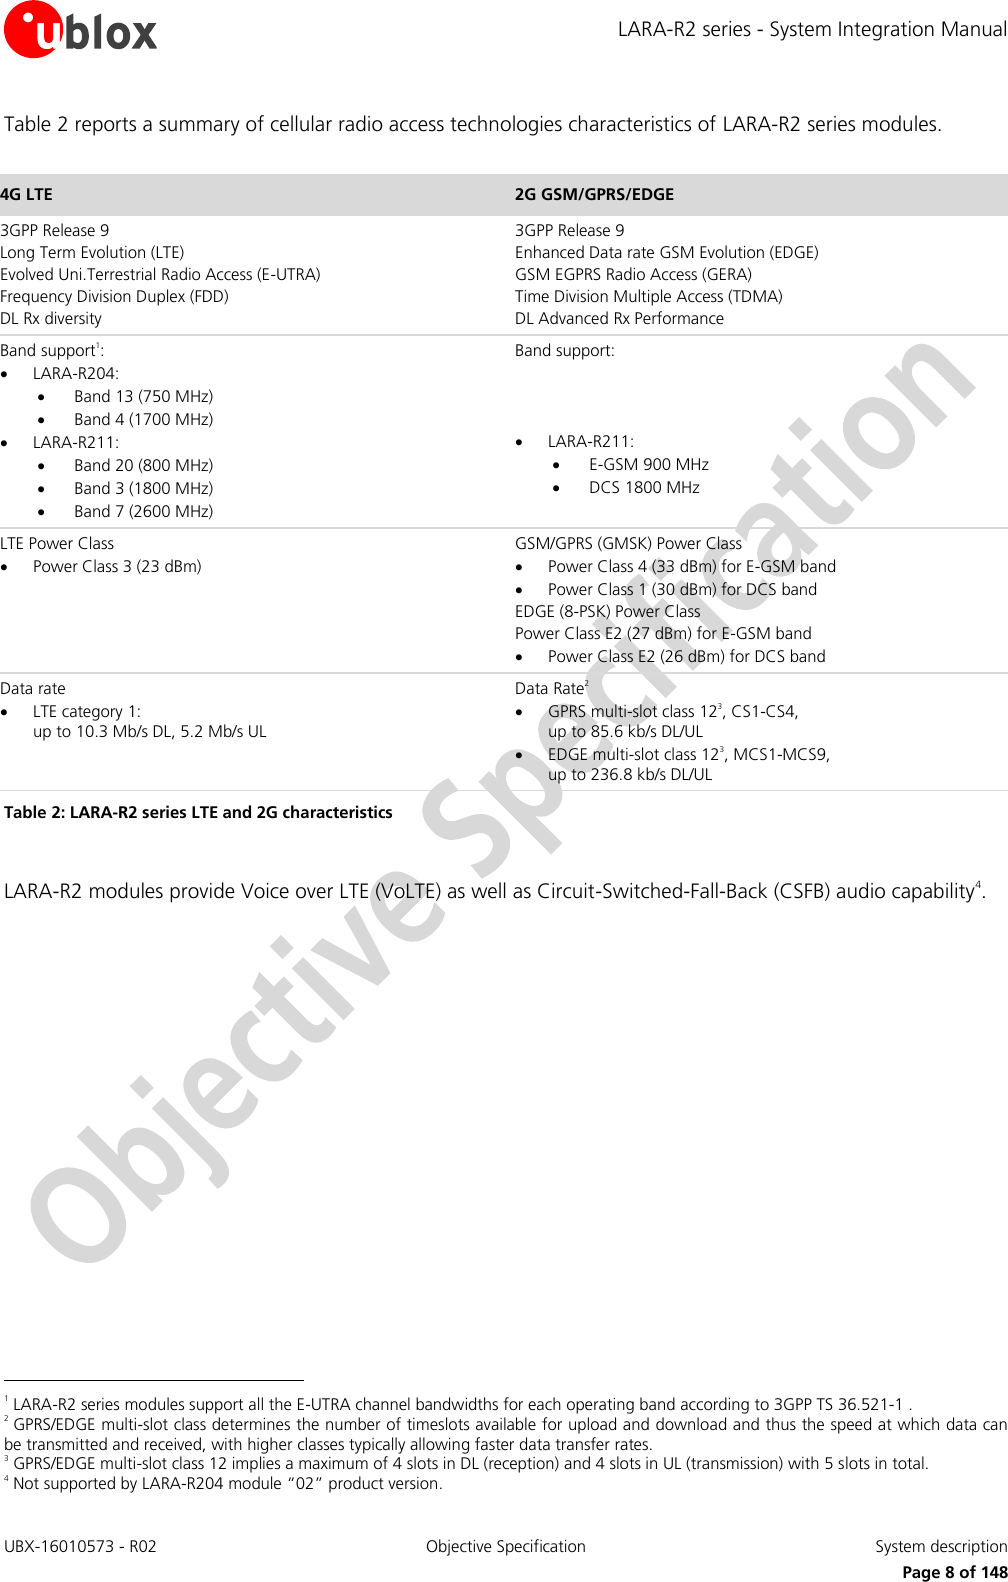 LARA-R2 series - System Integration Manual UBX-16010573 - R02  Objective Specification  System description     Page 8 of 148 Table 2 reports a summary of cellular radio access technologies characteristics of LARA-R2 series modules.  4G LTE 2G GSM/GPRS/EDGE 3GPP Release 9 Long Term Evolution (LTE) Evolved Uni.Terrestrial Radio Access (E-UTRA) Frequency Division Duplex (FDD) DL Rx diversity 3GPP Release 9 Enhanced Data rate GSM Evolution (EDGE) GSM EGPRS Radio Access (GERA) Time Division Multiple Access (TDMA) DL Advanced Rx Performance  Band support1:  LARA-R204:  Band 13 (750 MHz)  Band 4 (1700 MHz)  LARA-R211:  Band 20 (800 MHz)  Band 3 (1800 MHz)  Band 7 (2600 MHz) Band support:     LARA-R211:  E-GSM 900 MHz  DCS 1800 MHz  LTE Power Class  Power Class 3 (23 dBm)  GSM/GPRS (GMSK) Power Class  Power Class 4 (33 dBm) for E-GSM band  Power Class 1 (30 dBm) for DCS band EDGE (8-PSK) Power Class Power Class E2 (27 dBm) for E-GSM band  Power Class E2 (26 dBm) for DCS band Data rate  LTE category 1:  up to 10.3 Mb/s DL, 5.2 Mb/s UL  Data Rate2  GPRS multi-slot class 123, CS1-CS4,  up to 85.6 kb/s DL/UL   EDGE multi-slot class 123, MCS1-MCS9, up to 236.8 kb/s DL/UL  Table 2: LARA-R2 series LTE and 2G characteristics  LARA-R2 modules provide Voice over LTE (VoLTE) as well as Circuit-Switched-Fall-Back (CSFB) audio capability4.                                                         1 LARA-R2 series modules support all the E-UTRA channel bandwidths for each operating band according to 3GPP TS 36.521-1 . 2 GPRS/EDGE multi-slot class determines the number of timeslots available for upload and download and thus the speed at which data can be transmitted and received, with higher classes typically allowing faster data transfer rates. 3 GPRS/EDGE multi-slot class 12 implies a maximum of 4 slots in DL (reception) and 4 slots in UL (transmission) with 5 slots in total. 4 Not supported by LARA-R204 module “02” product version. 